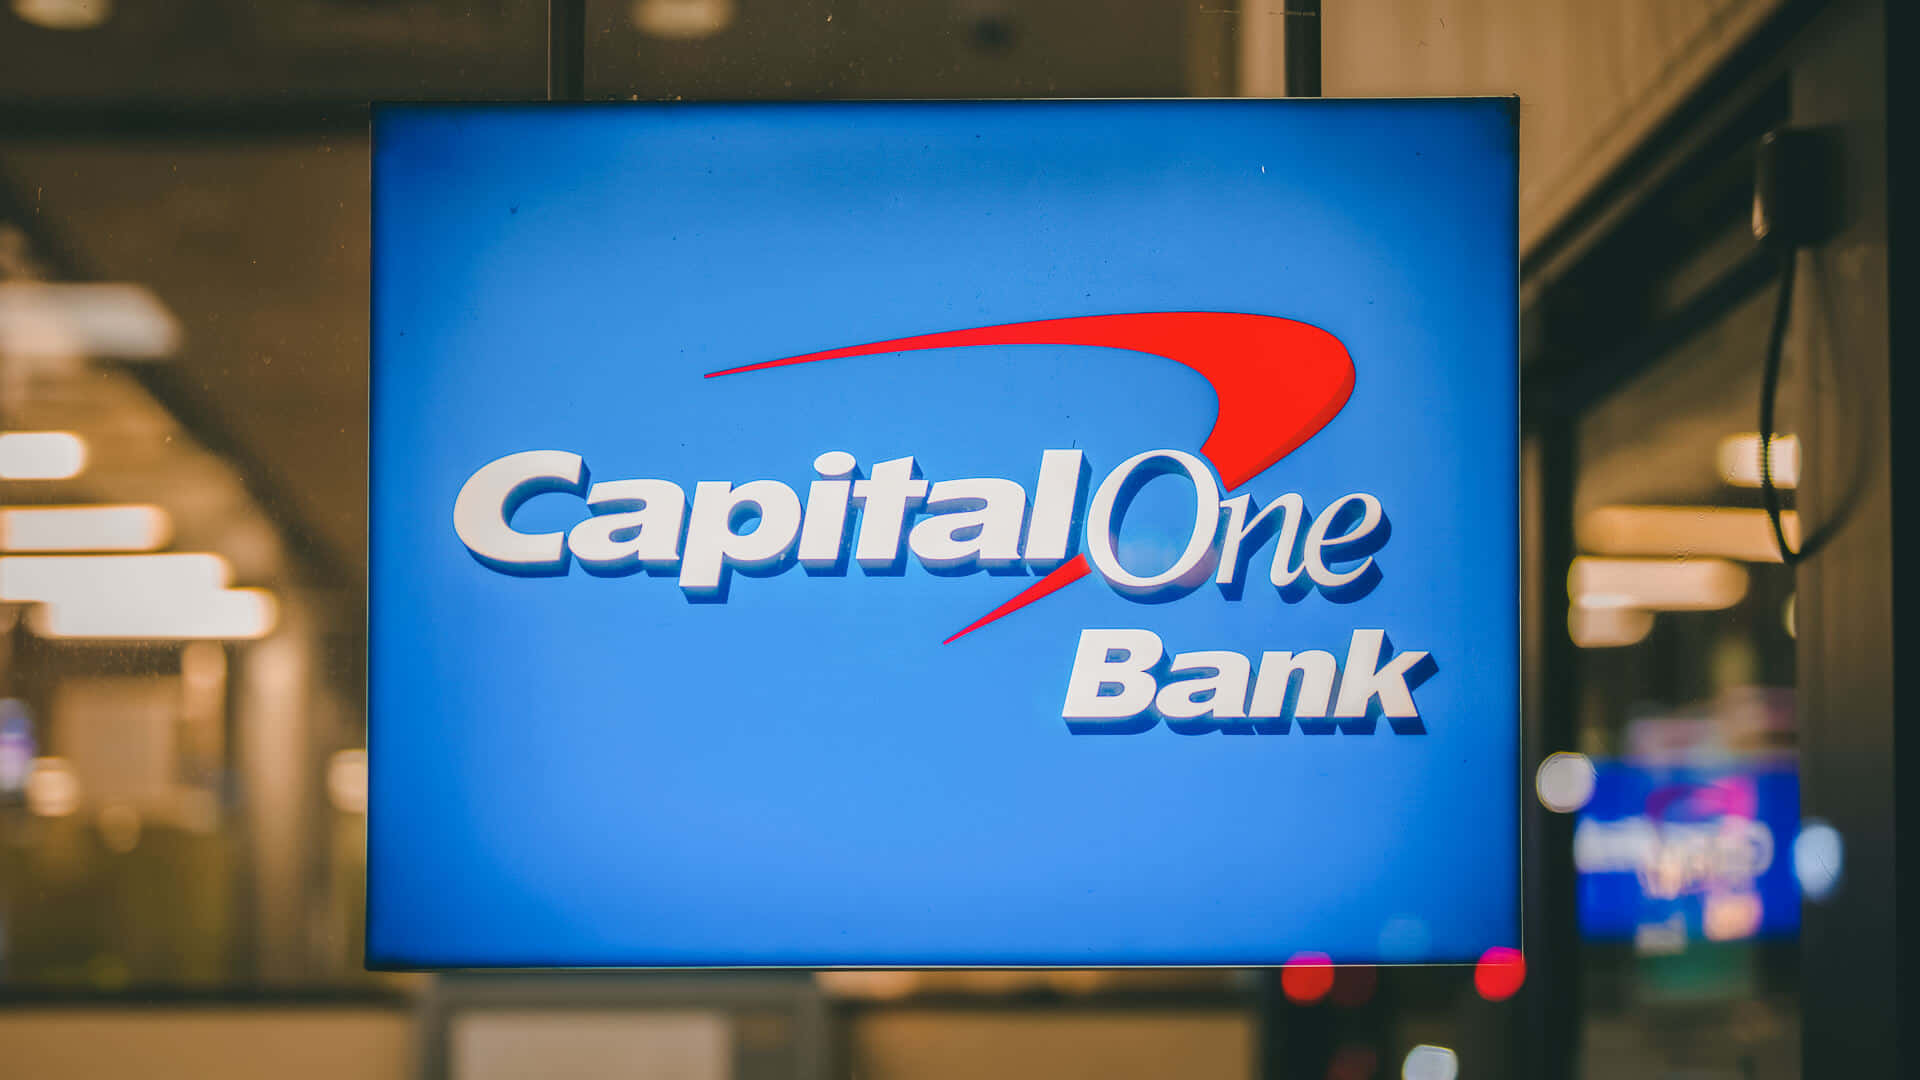 Capital One On Small Screen Background